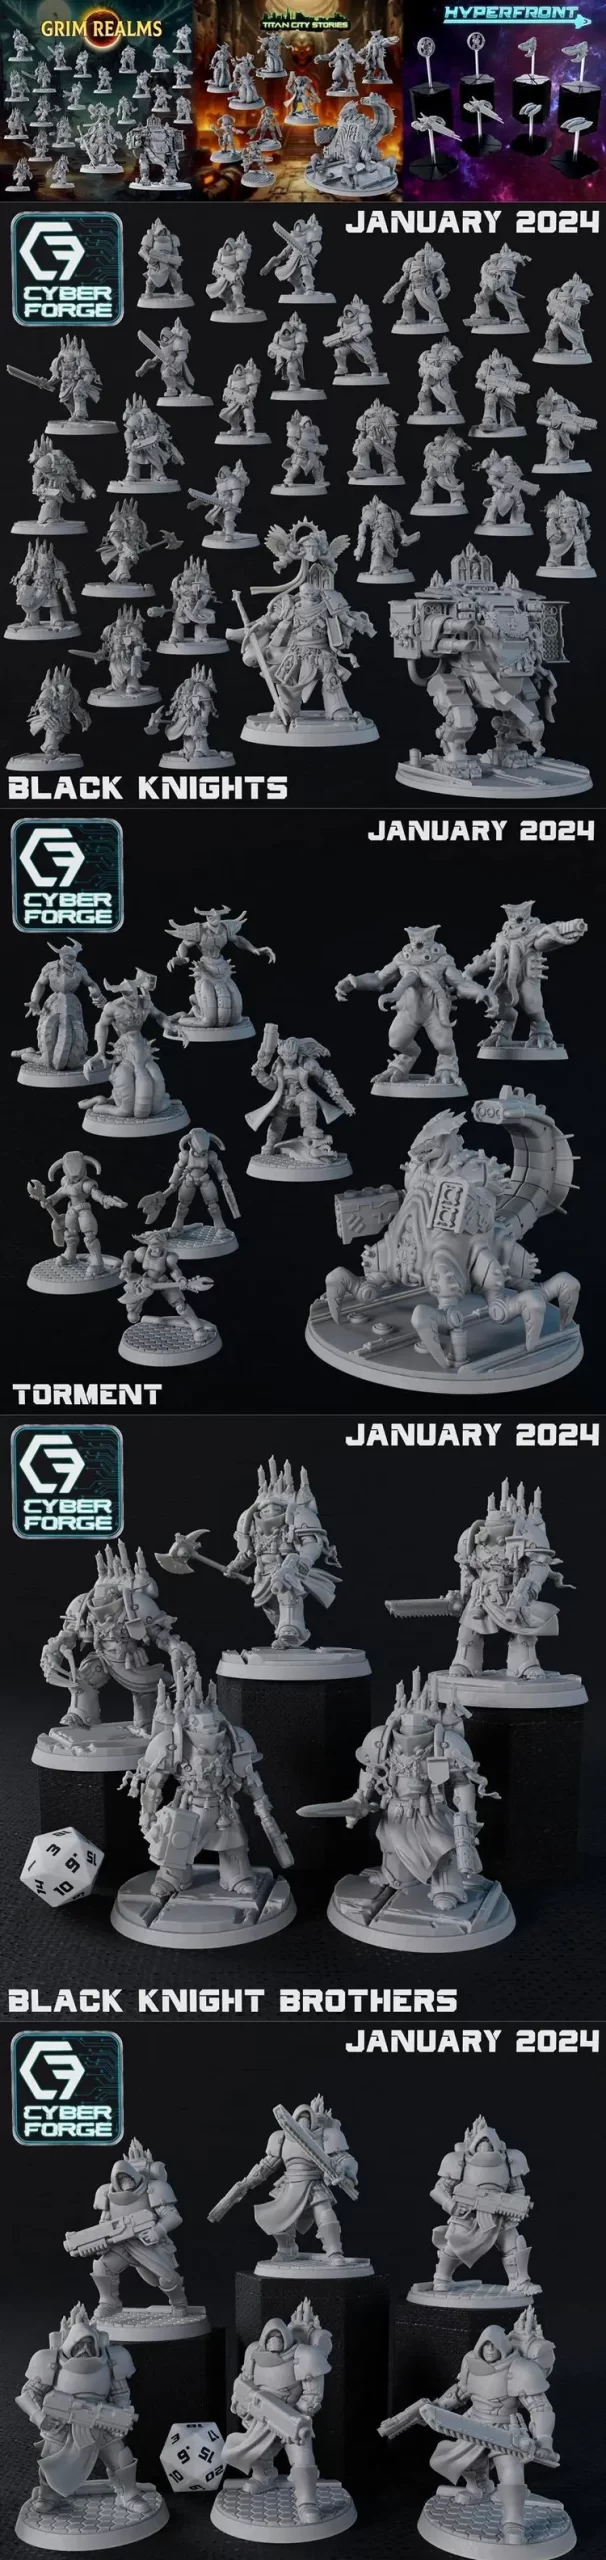 Cyber-Forge Miniatures - January 2024